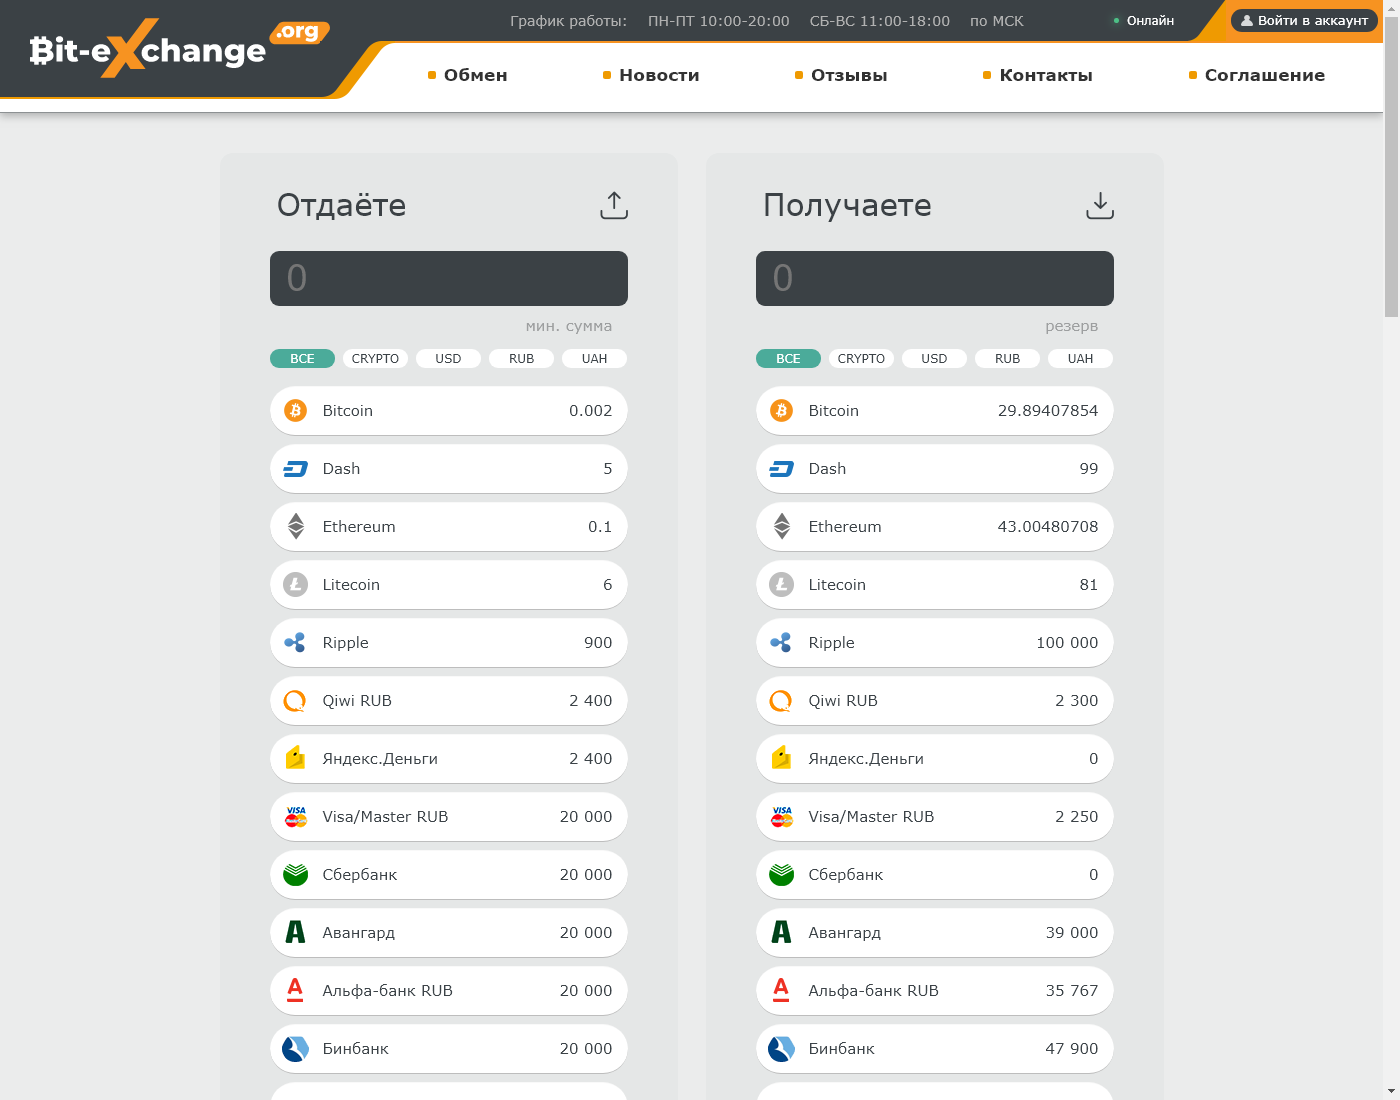 Bit-eXchange user interface: the home page in English